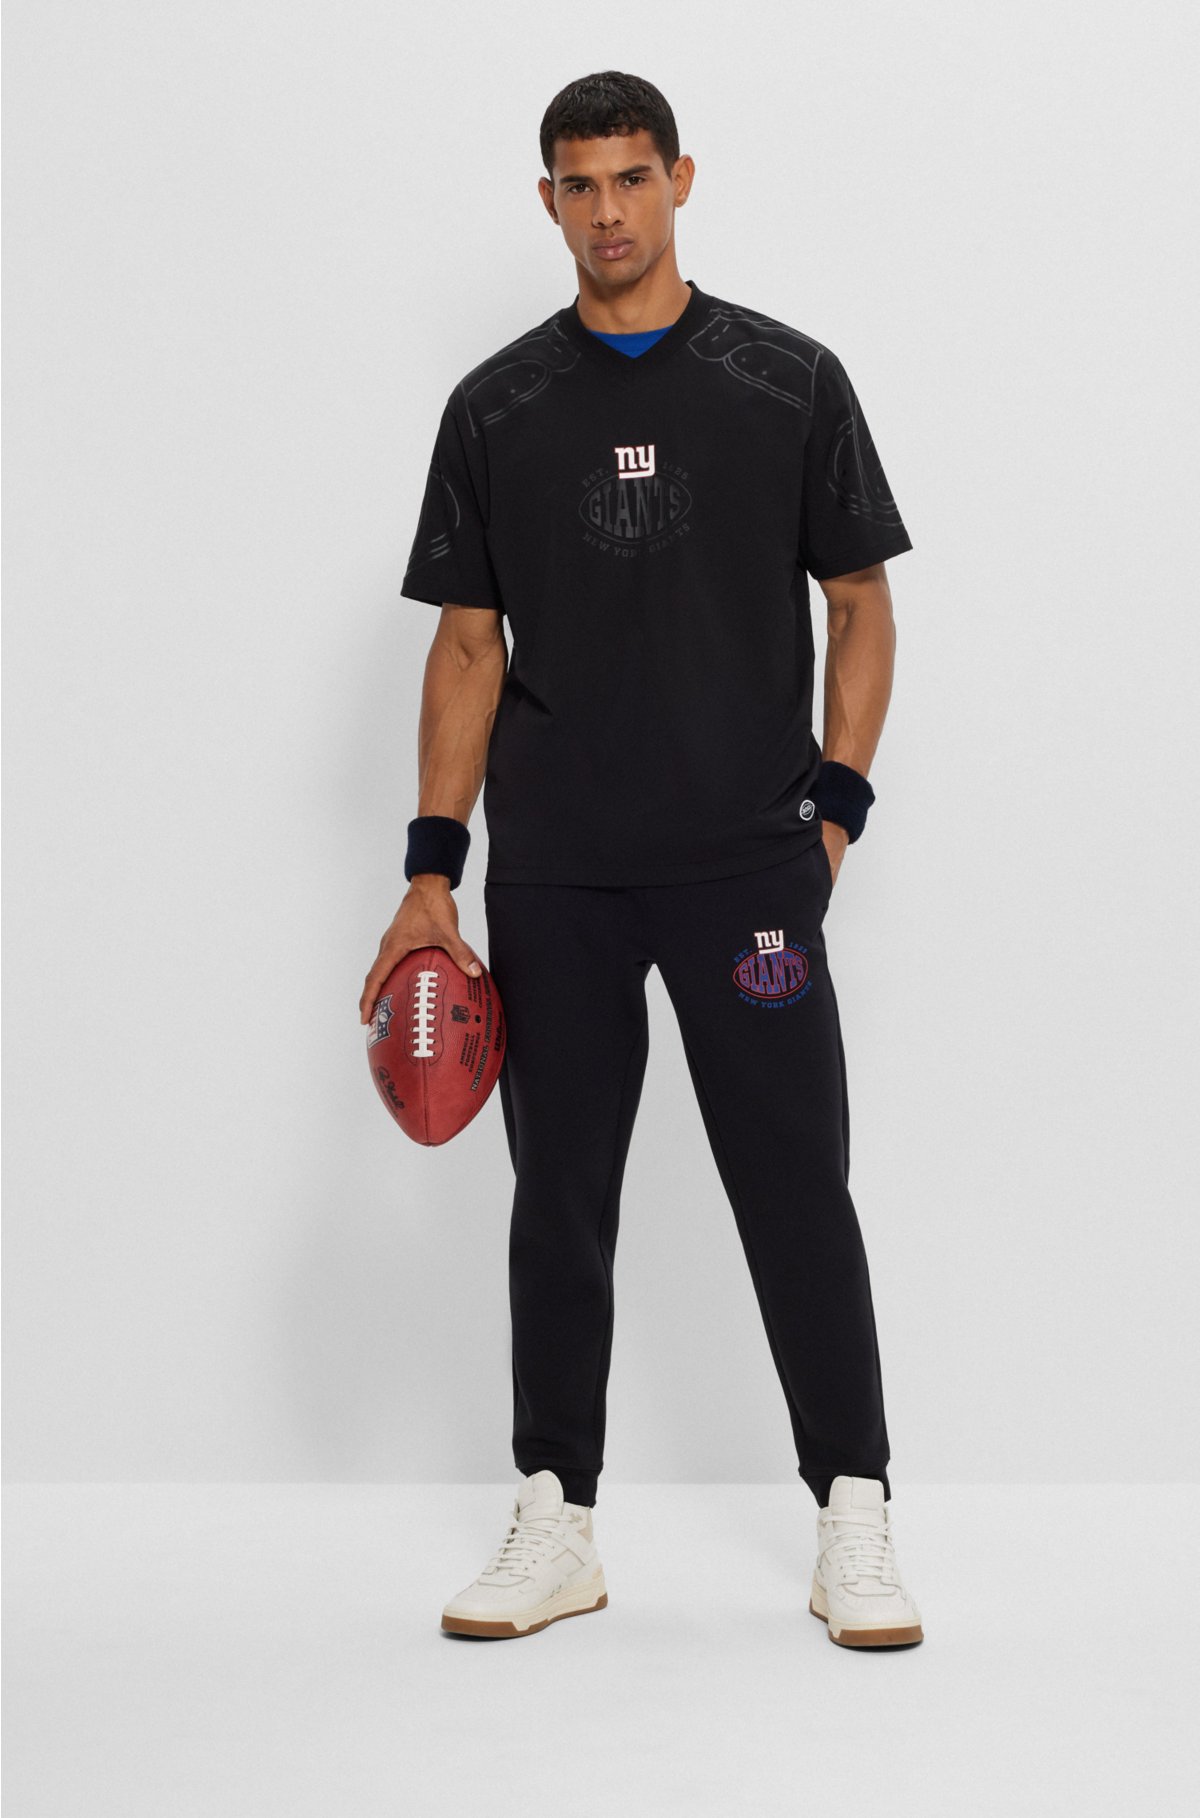 BOSS x NFL oversize-fit T-shirt with collaborative branding, Giants